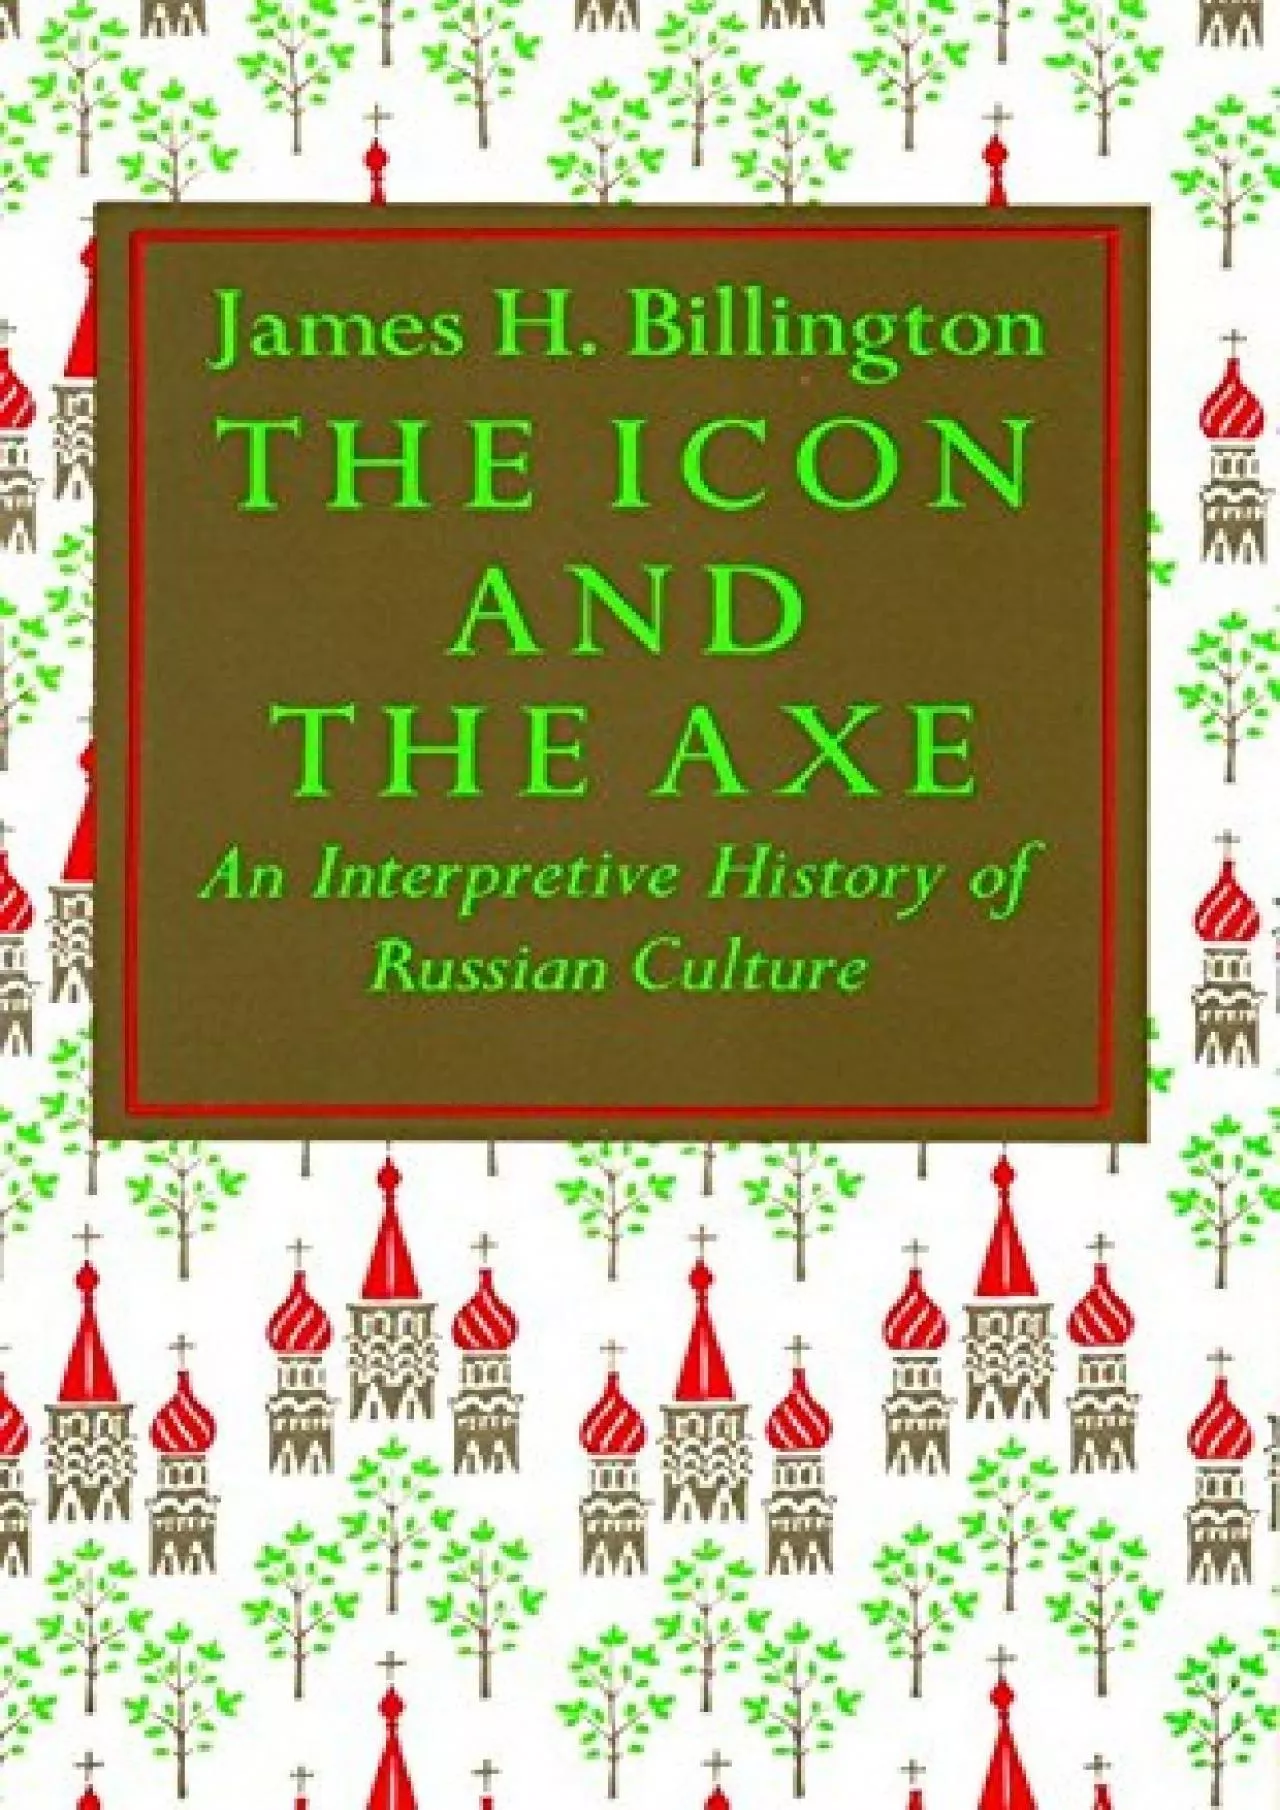 (BOOK)-The Icon and the Axe: An Interpretative History of Russian Culture (Vintage)